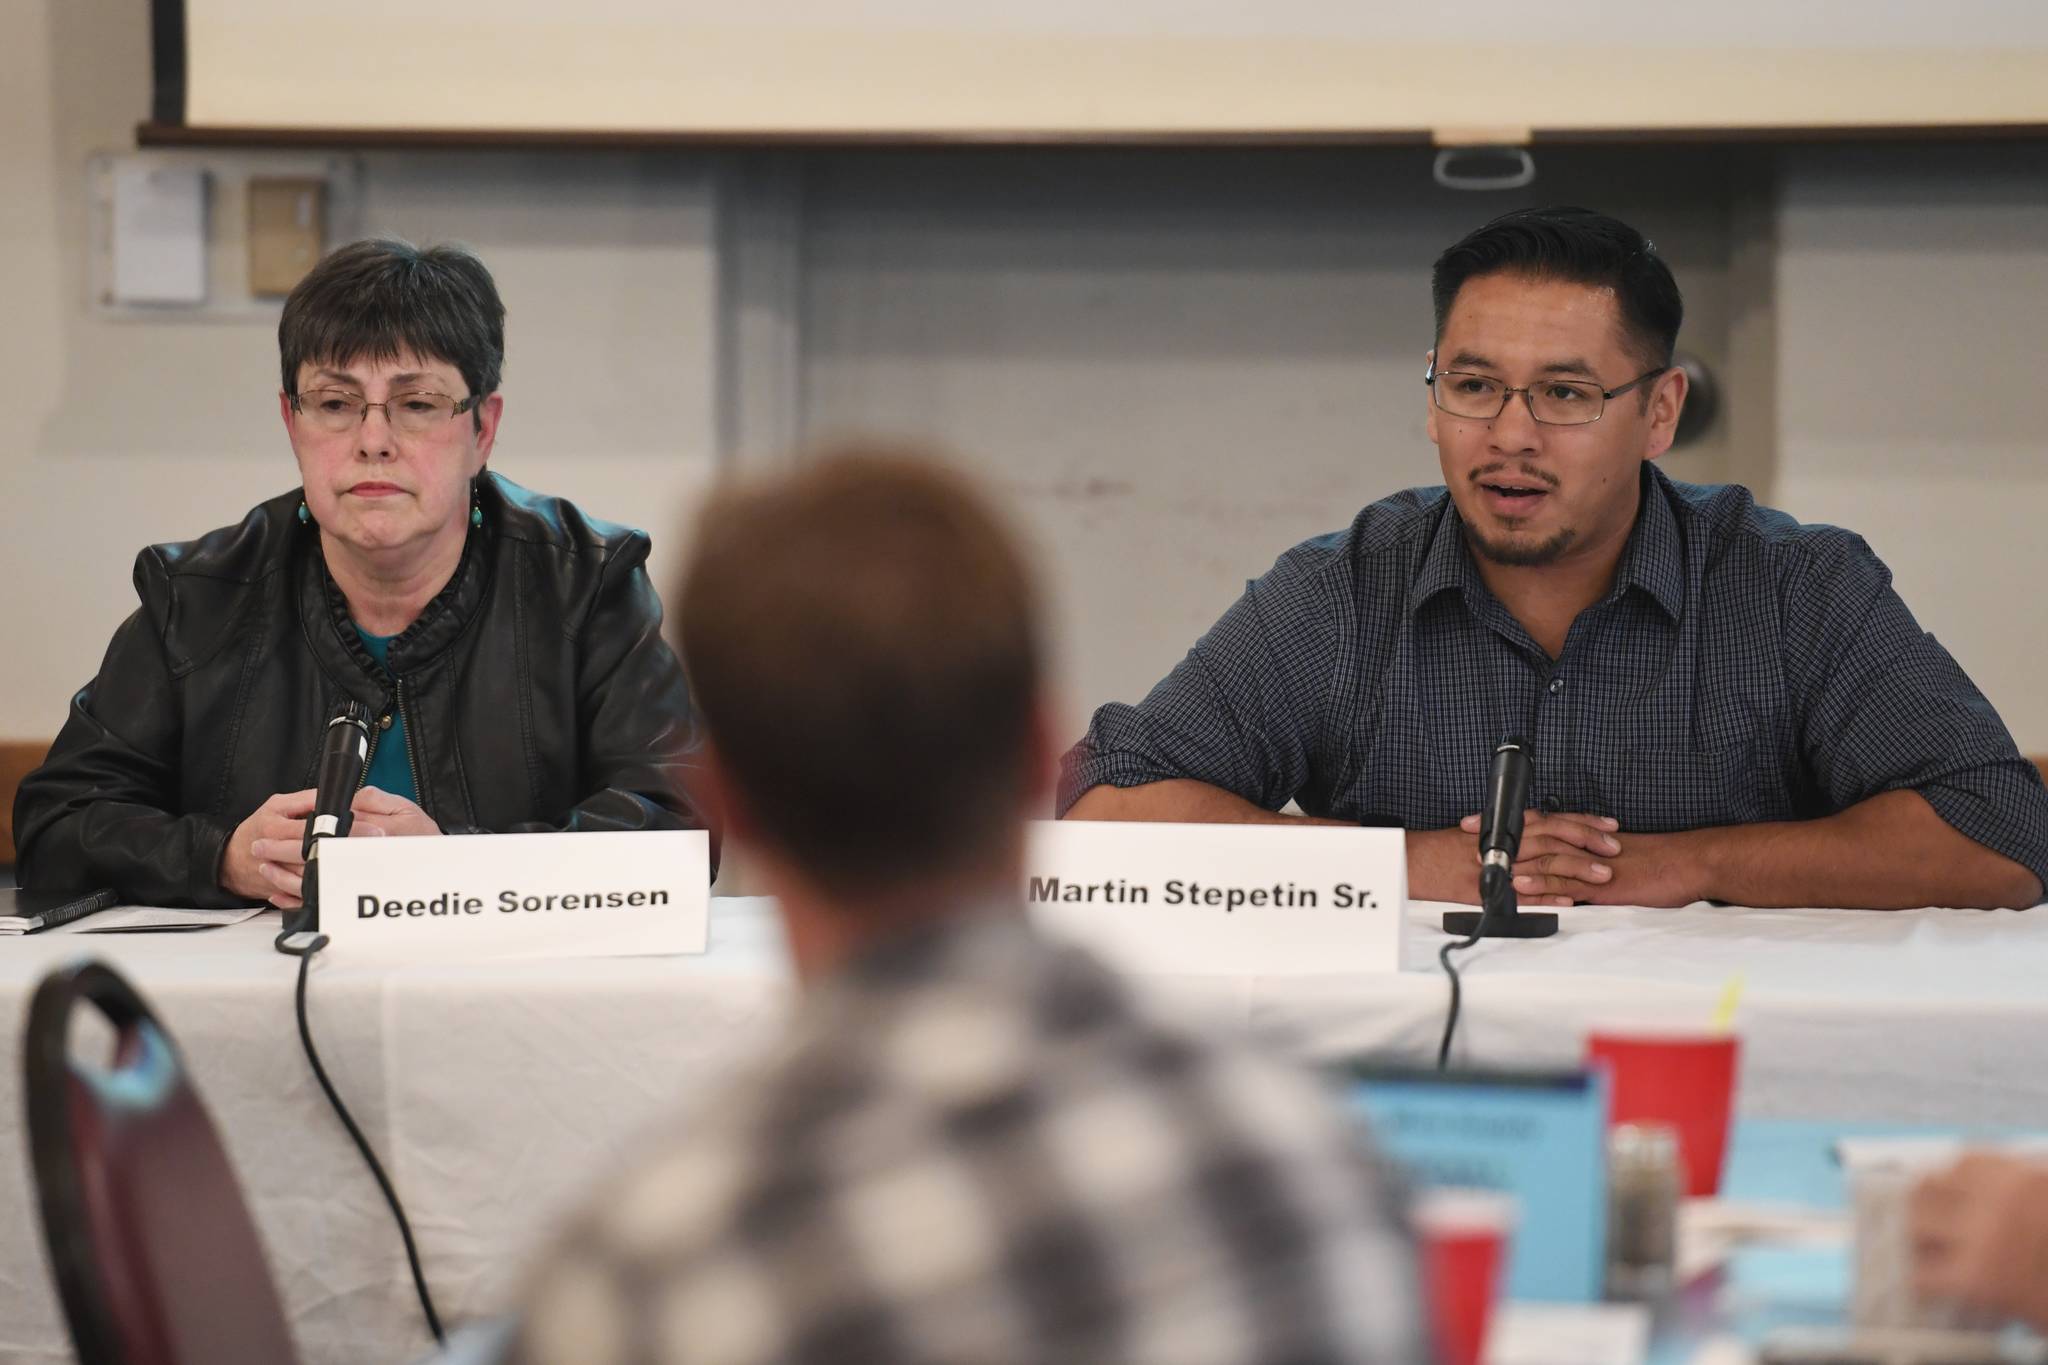 Juneau School Board candidates Deedie Sorensen, left, and Martin Stepetin, Sr. speak to the Juneau Chamber of Commerce during its weekly luncheon at the Moose Lodge on Thursday, Sept. 19, 2019. Candidates Bonnie Jensen and Emil Mackey are not at the forum. (Michael Penn | Juneau Empire)